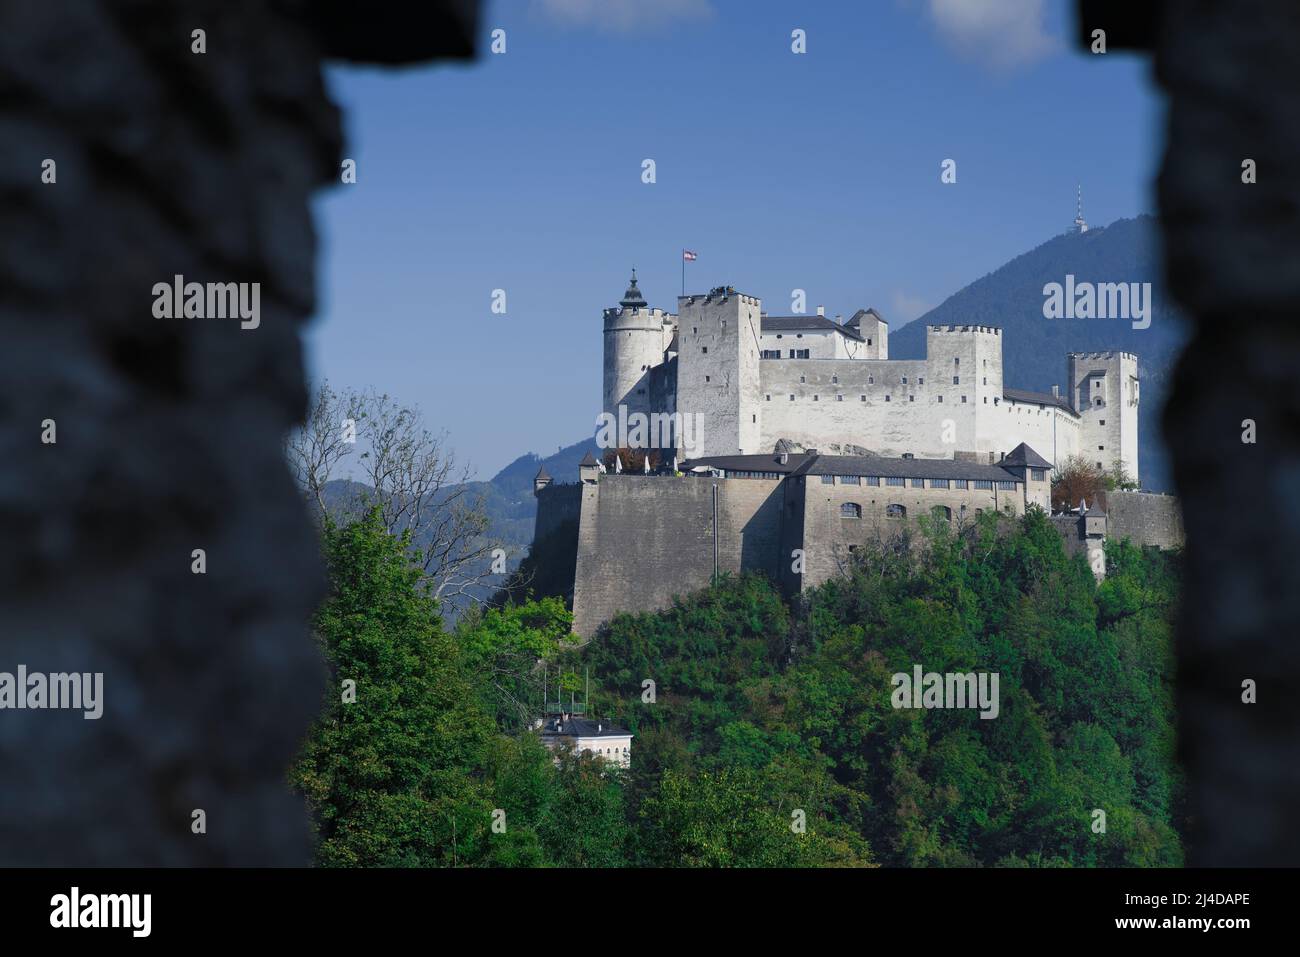 Old castle on the hill in Austria Stock Photo